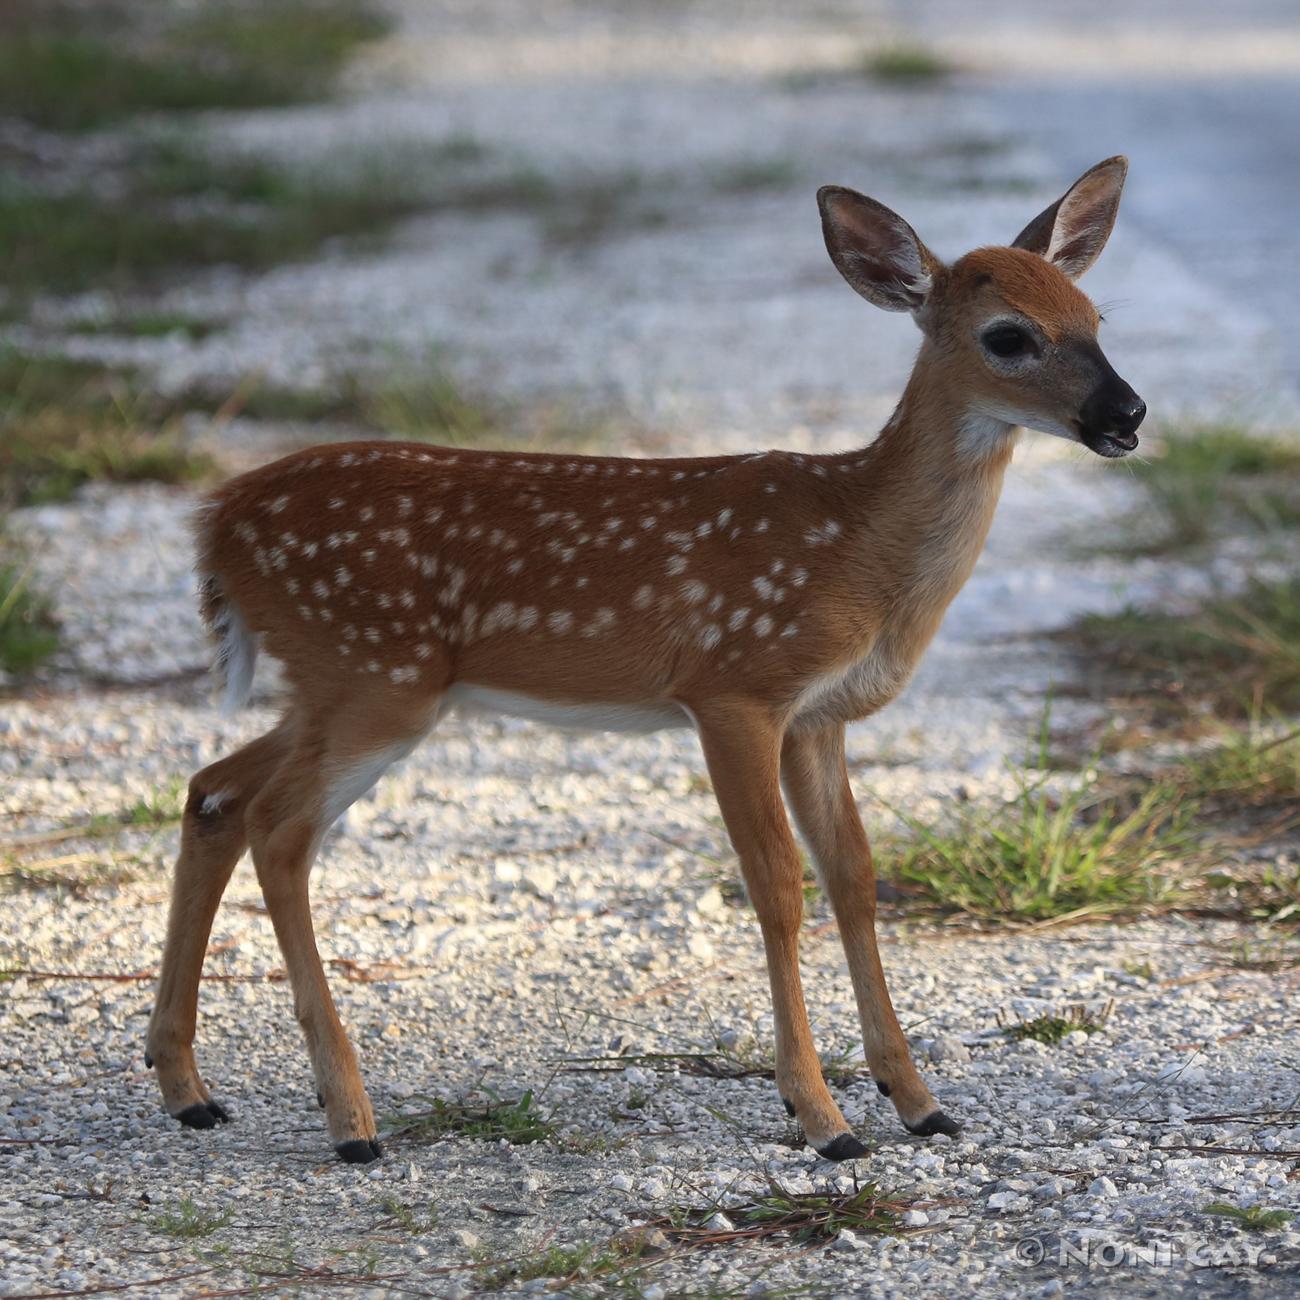 Key Deer and Fawn | Noni Cay Photography